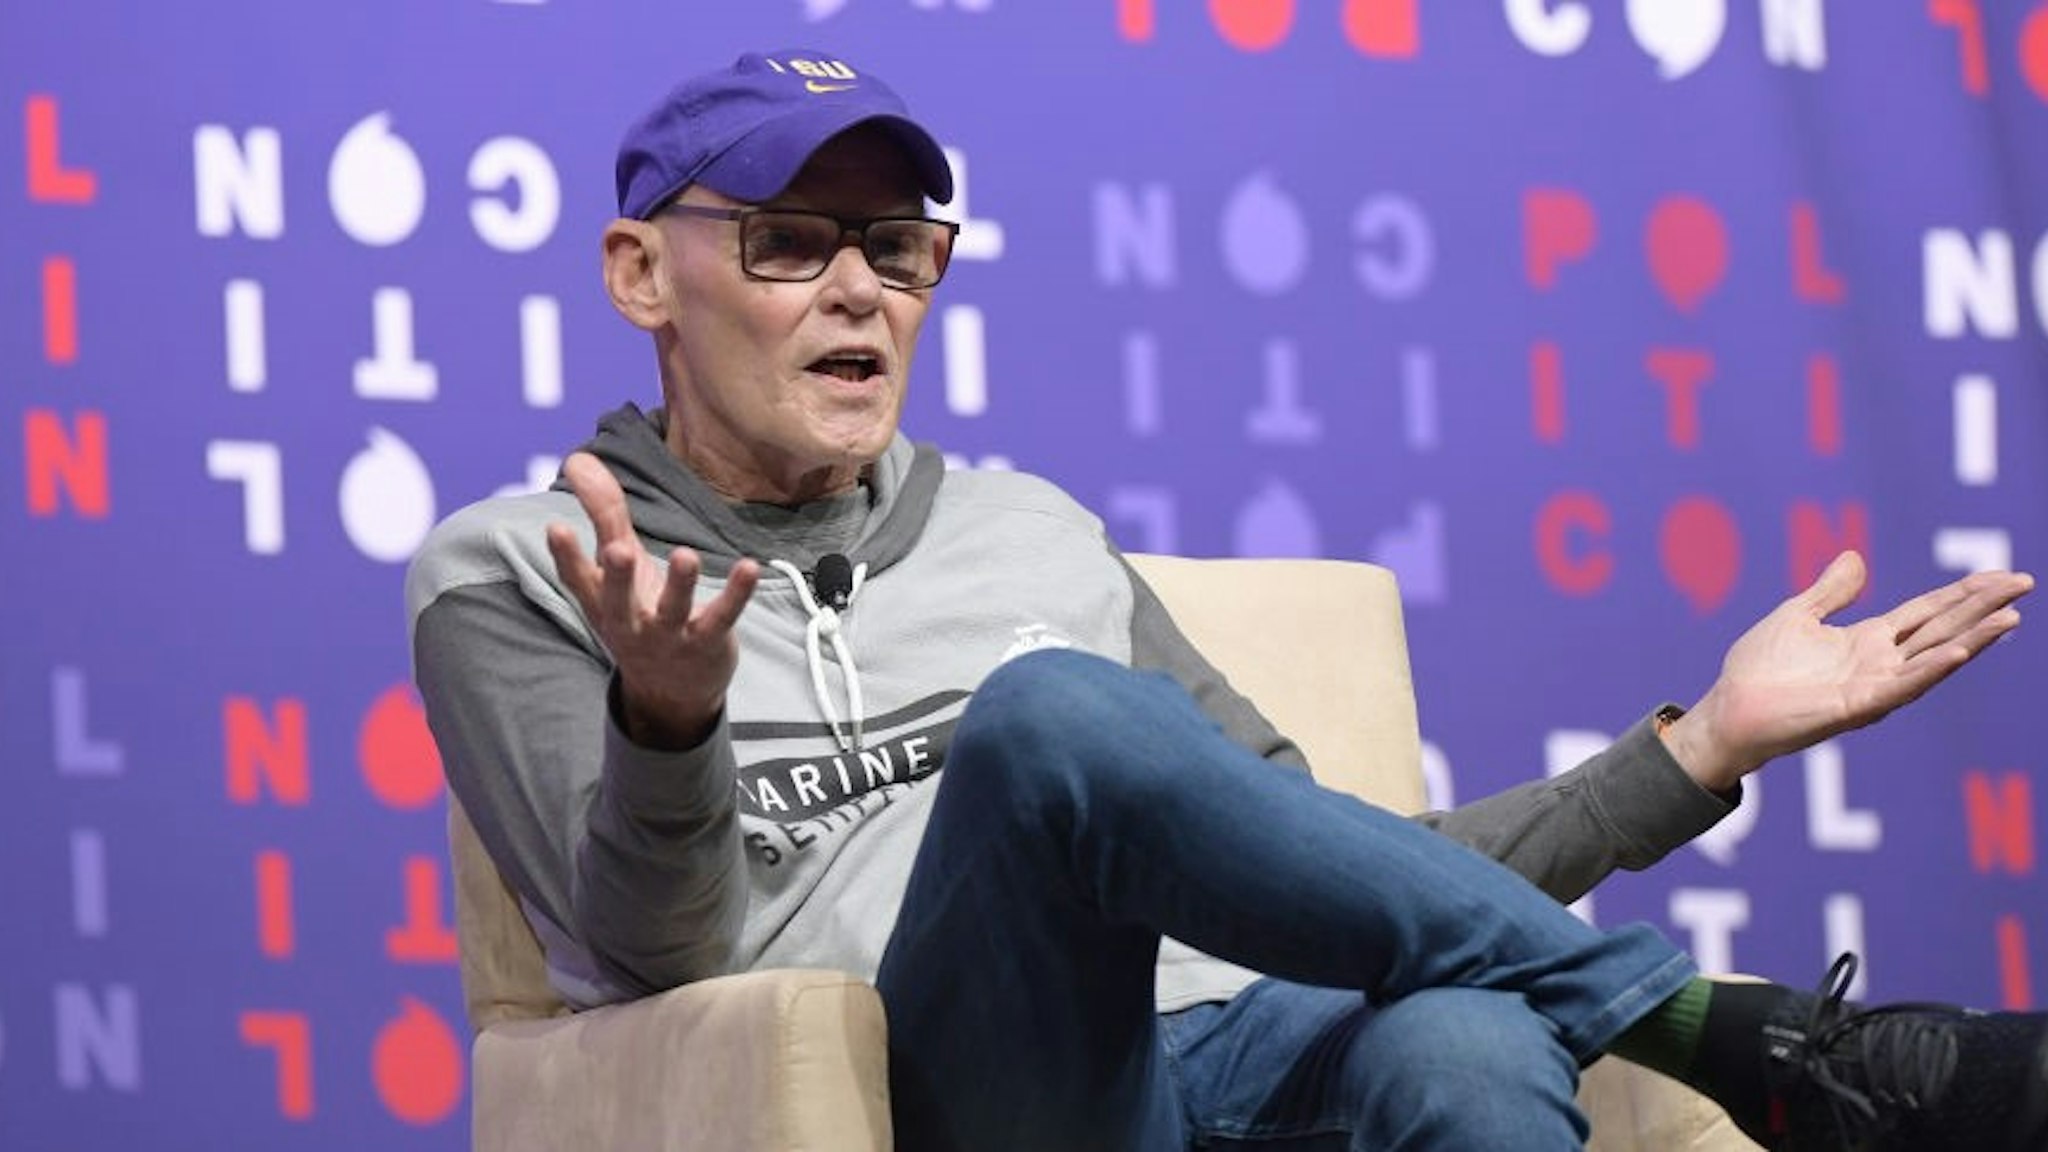 NASHVILLE, TENNESSEE - OCTOBER 26: James Carville speaks onstage during the 2019 Politicon at Music City Center on October 26, 2019 in Nashville, Tennessee. (Photo by